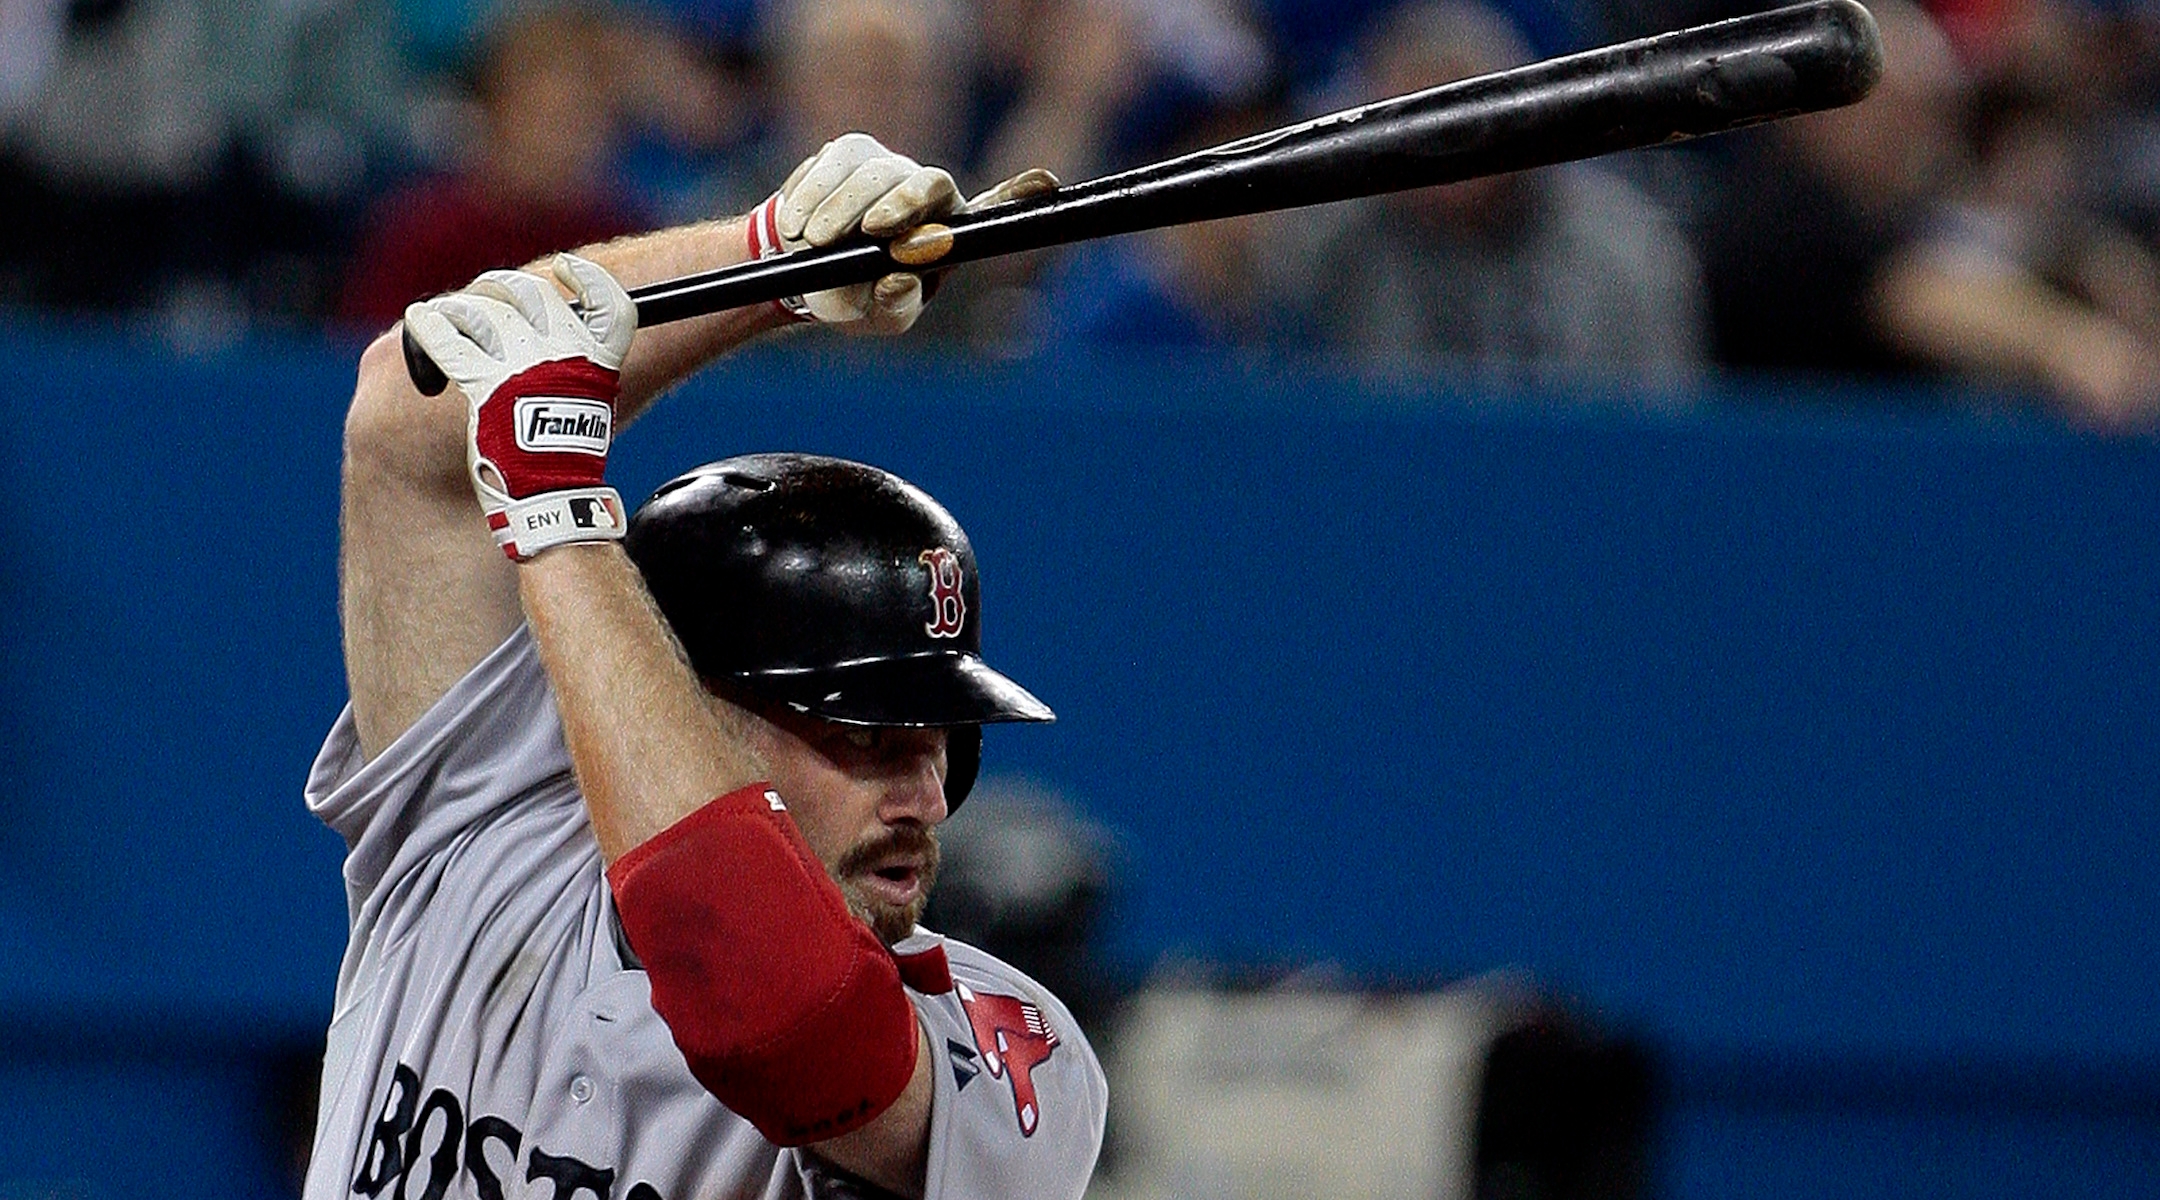 Kevin Youkilis went his entire career without swinging at a single